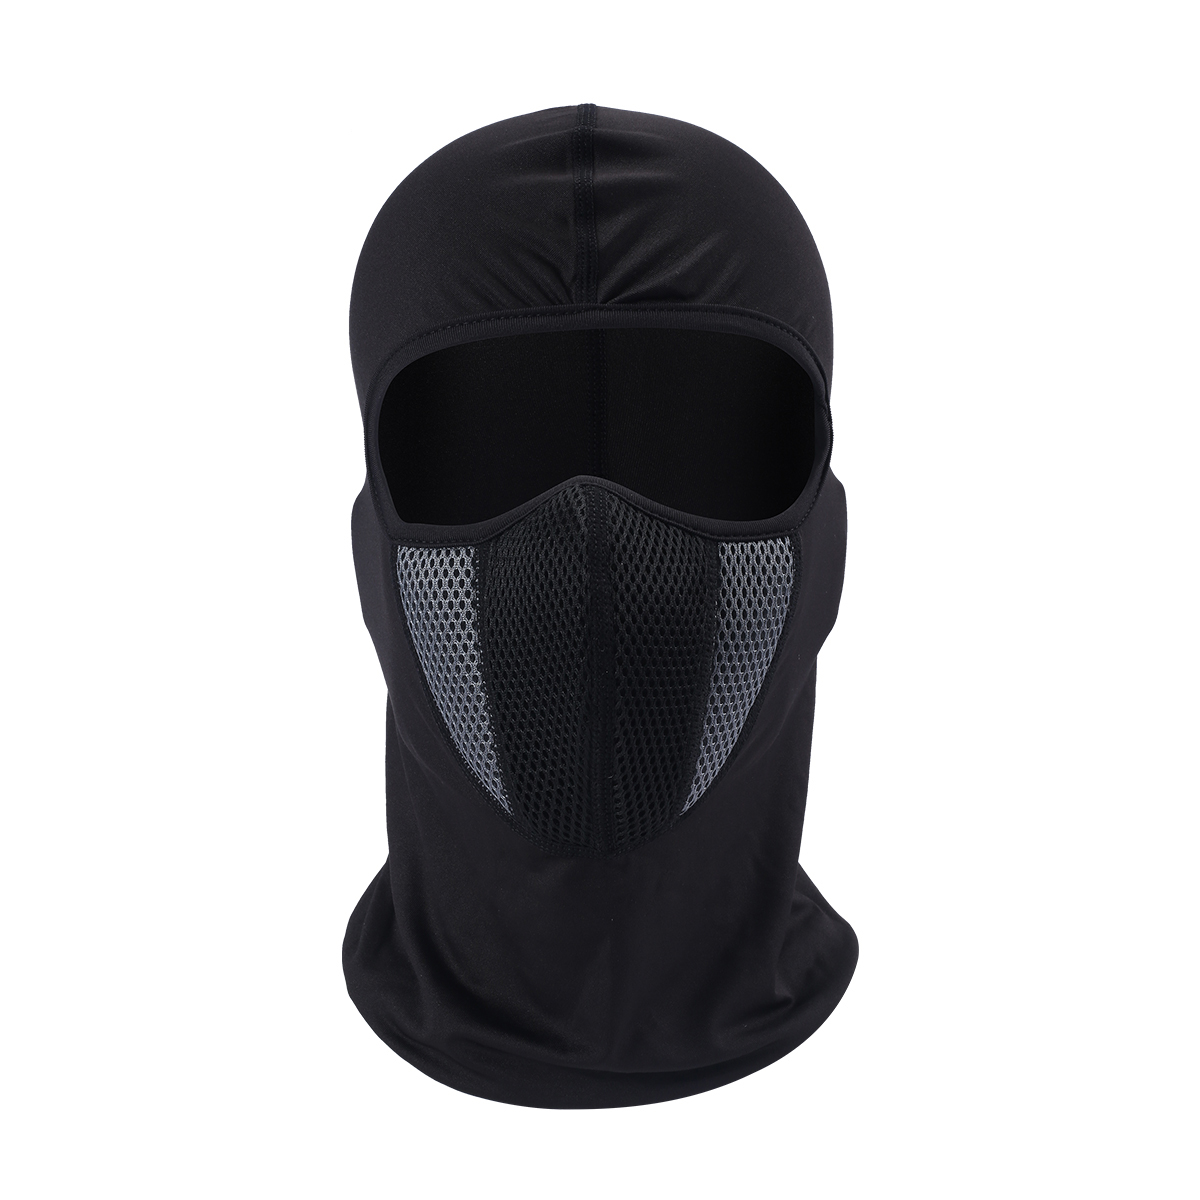 Moto Face Mask Motorcycle Face Shield Tactical Airsoft Paintball Cycling Bike Ski Army Helmet Full Face Mask